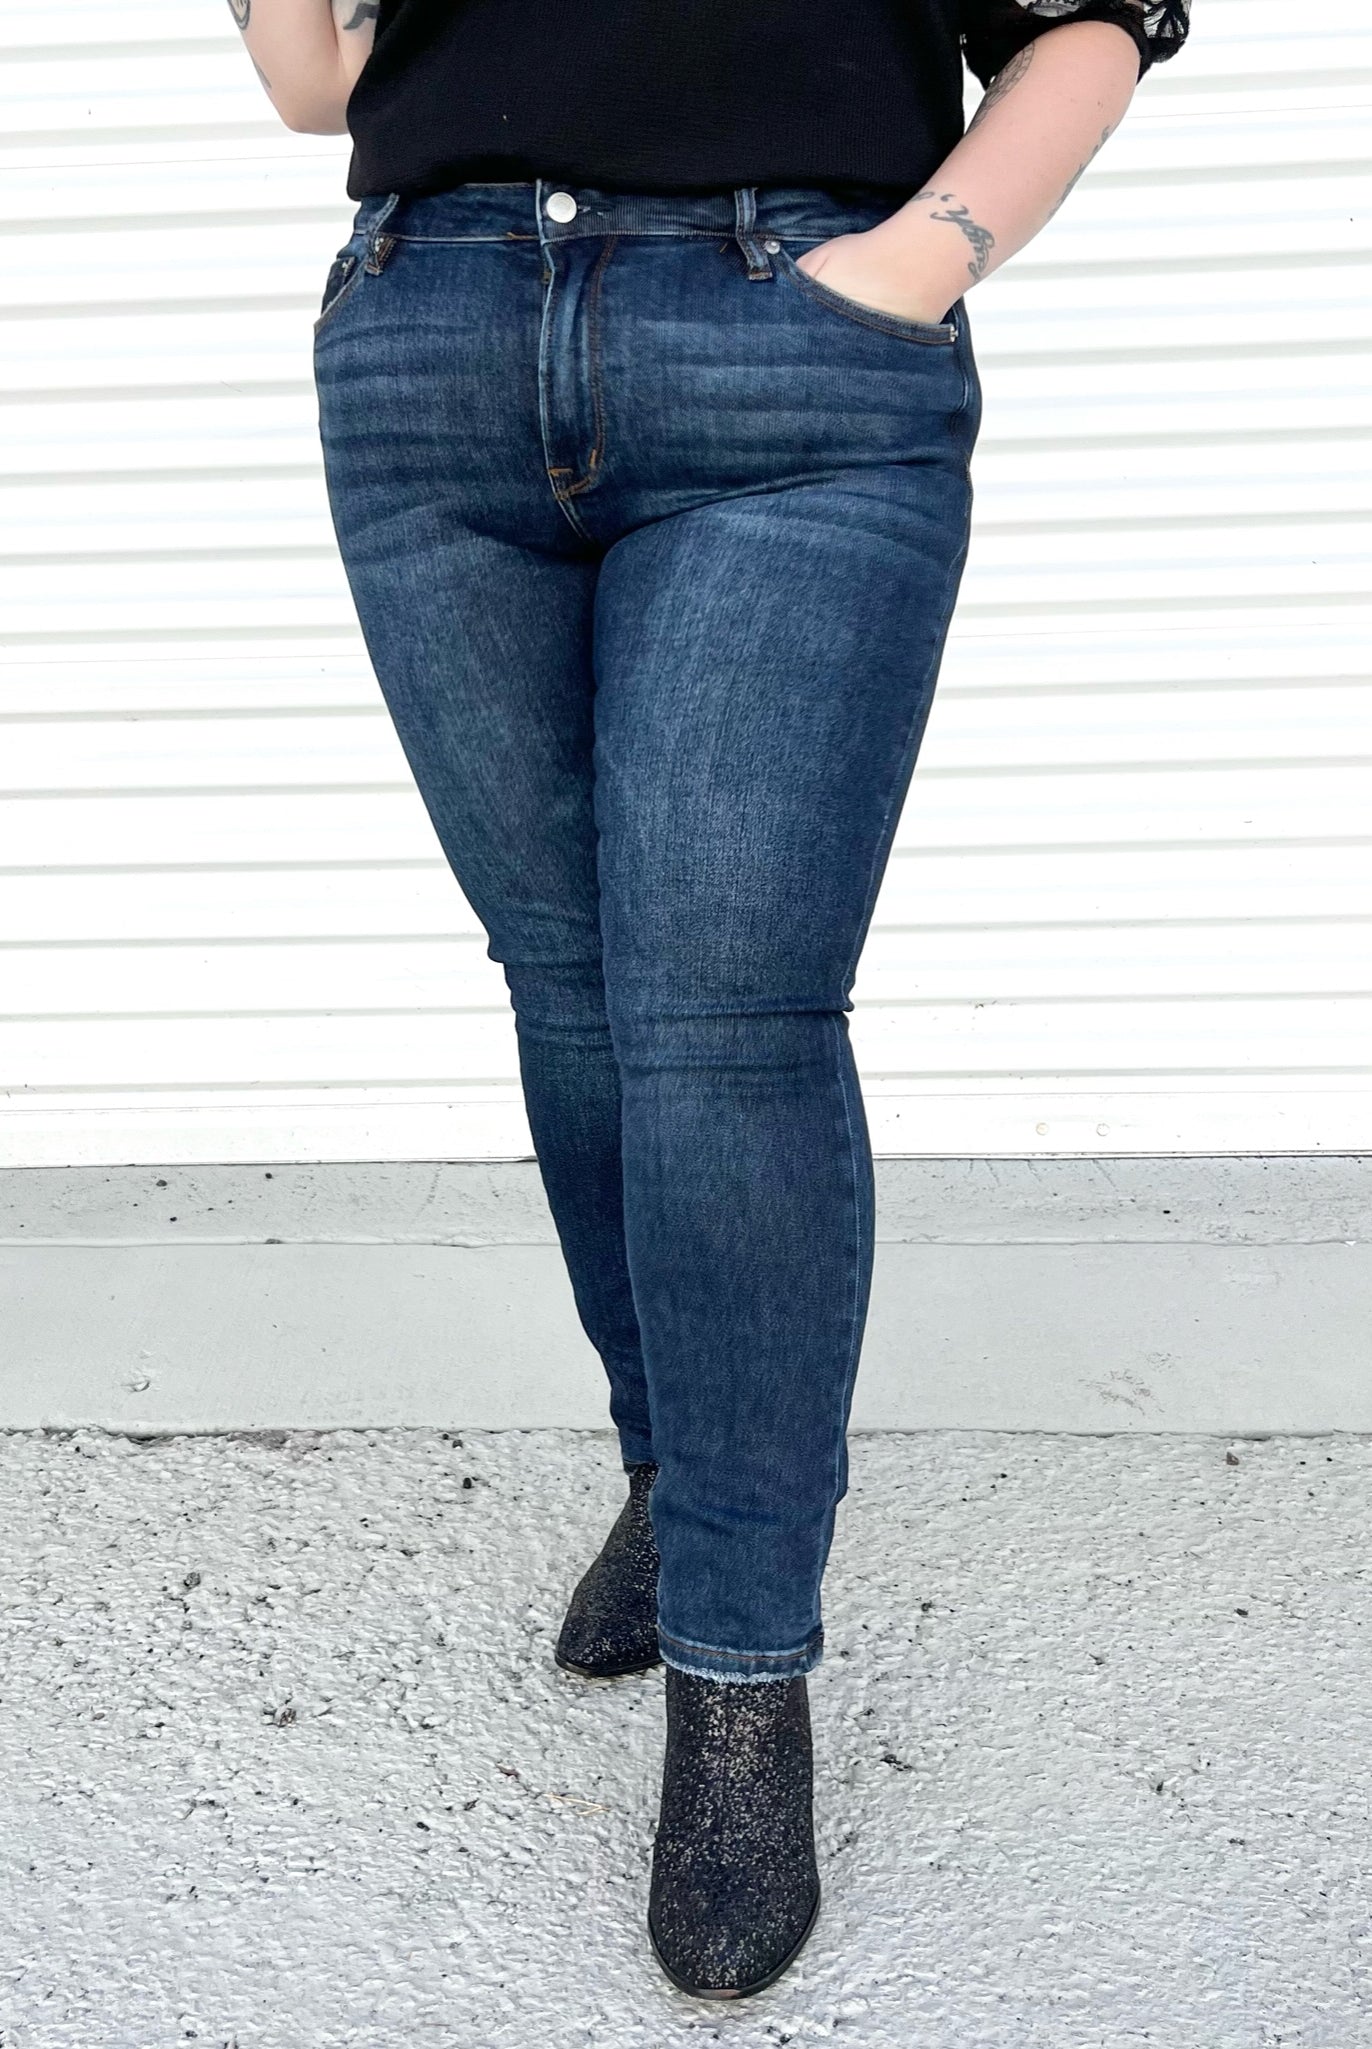 Show Off Slim Cut Mid Rise Jeans-190 Jeans-Mica Denim-Heathered Boho Boutique, Women's Fashion and Accessories in Palmetto, FL